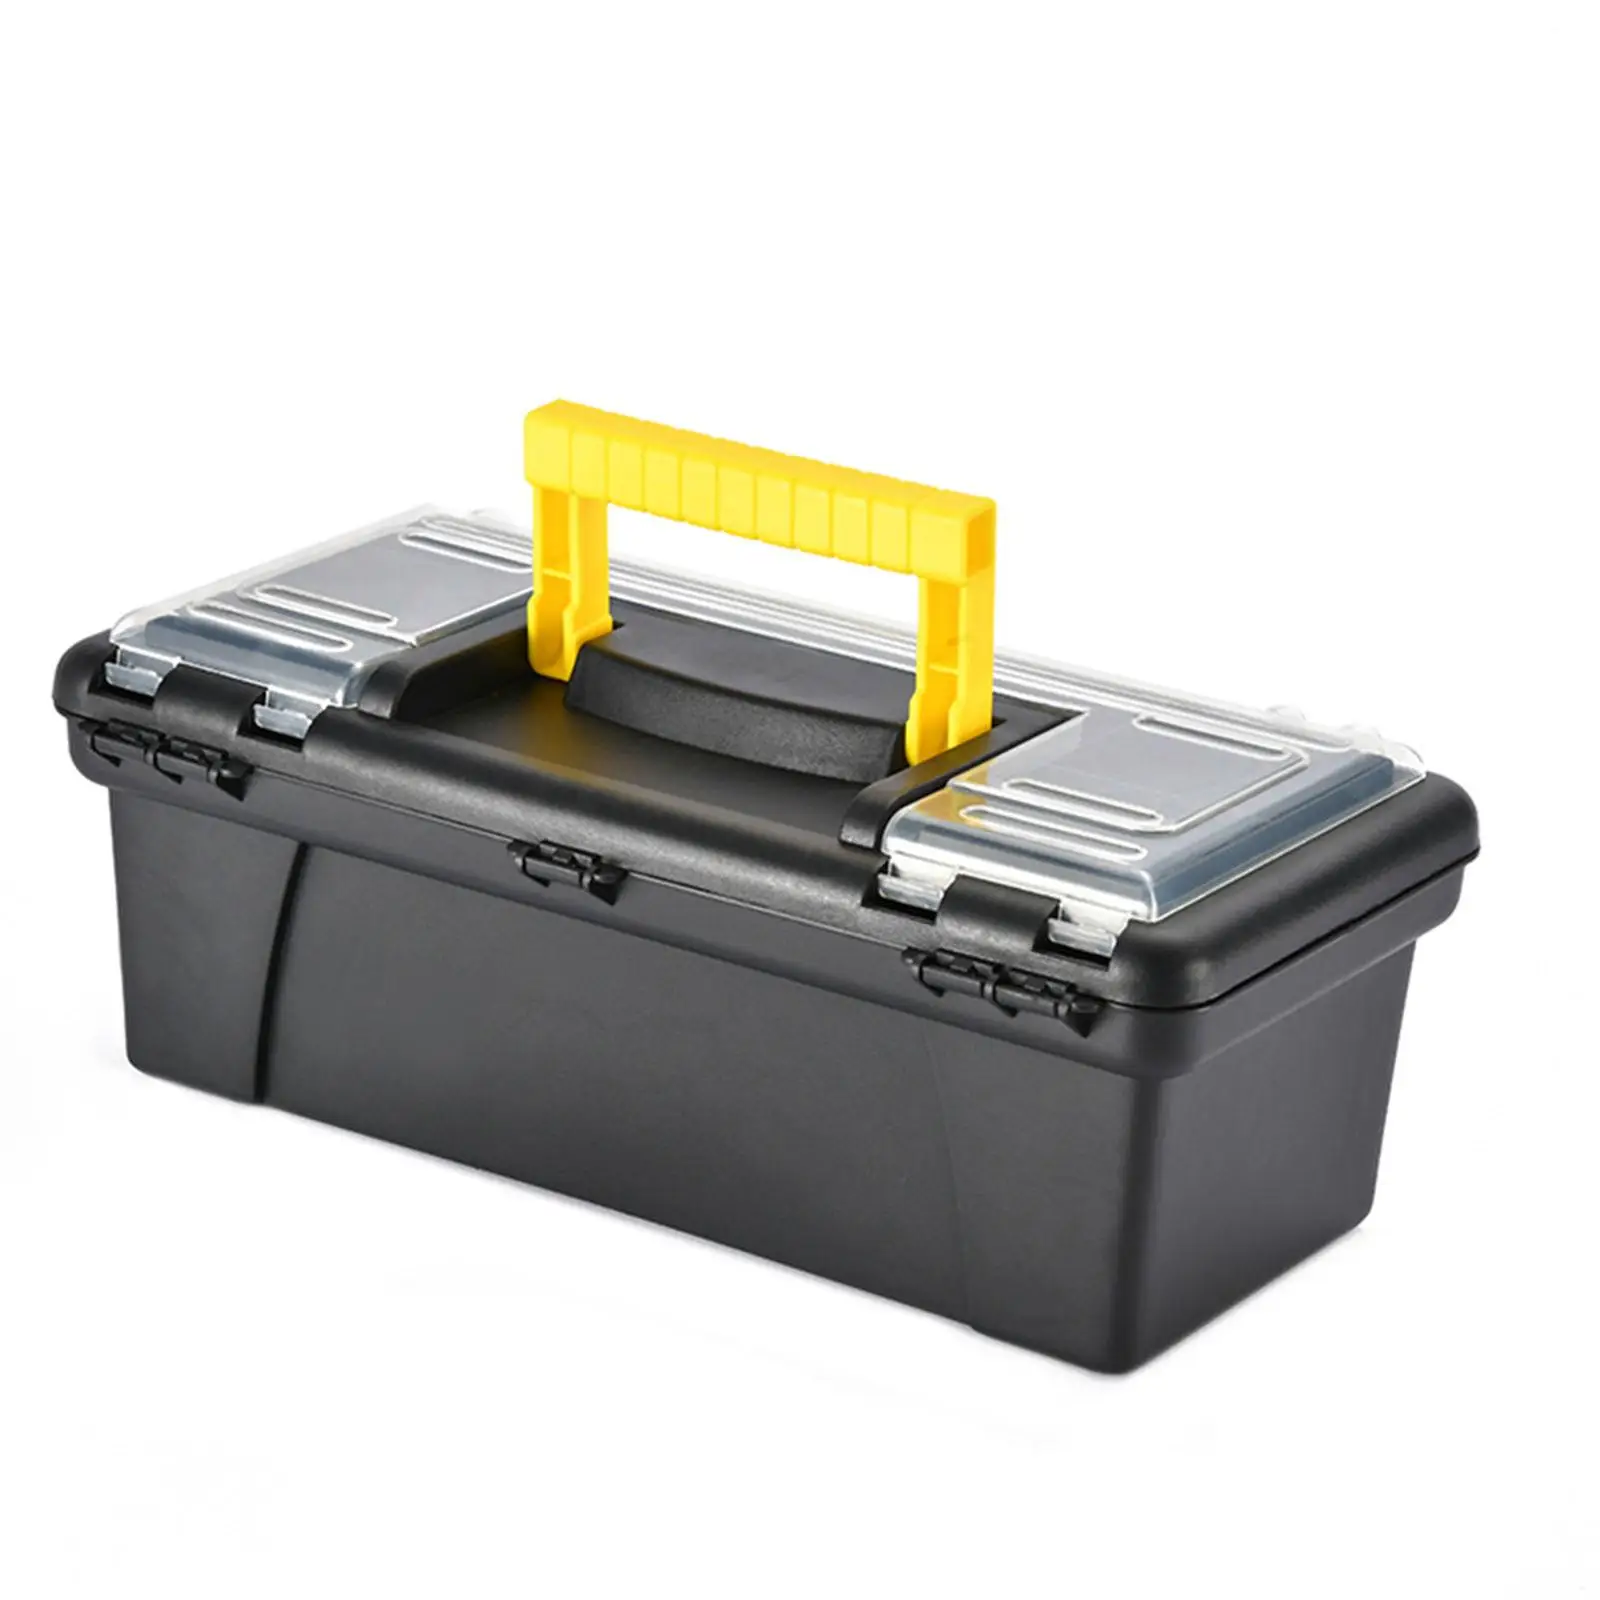 Multifunction Toolbox Easy to Carry Large Space with Handle Organizer Durable Storage Case for Electrician Plumber Home Garage